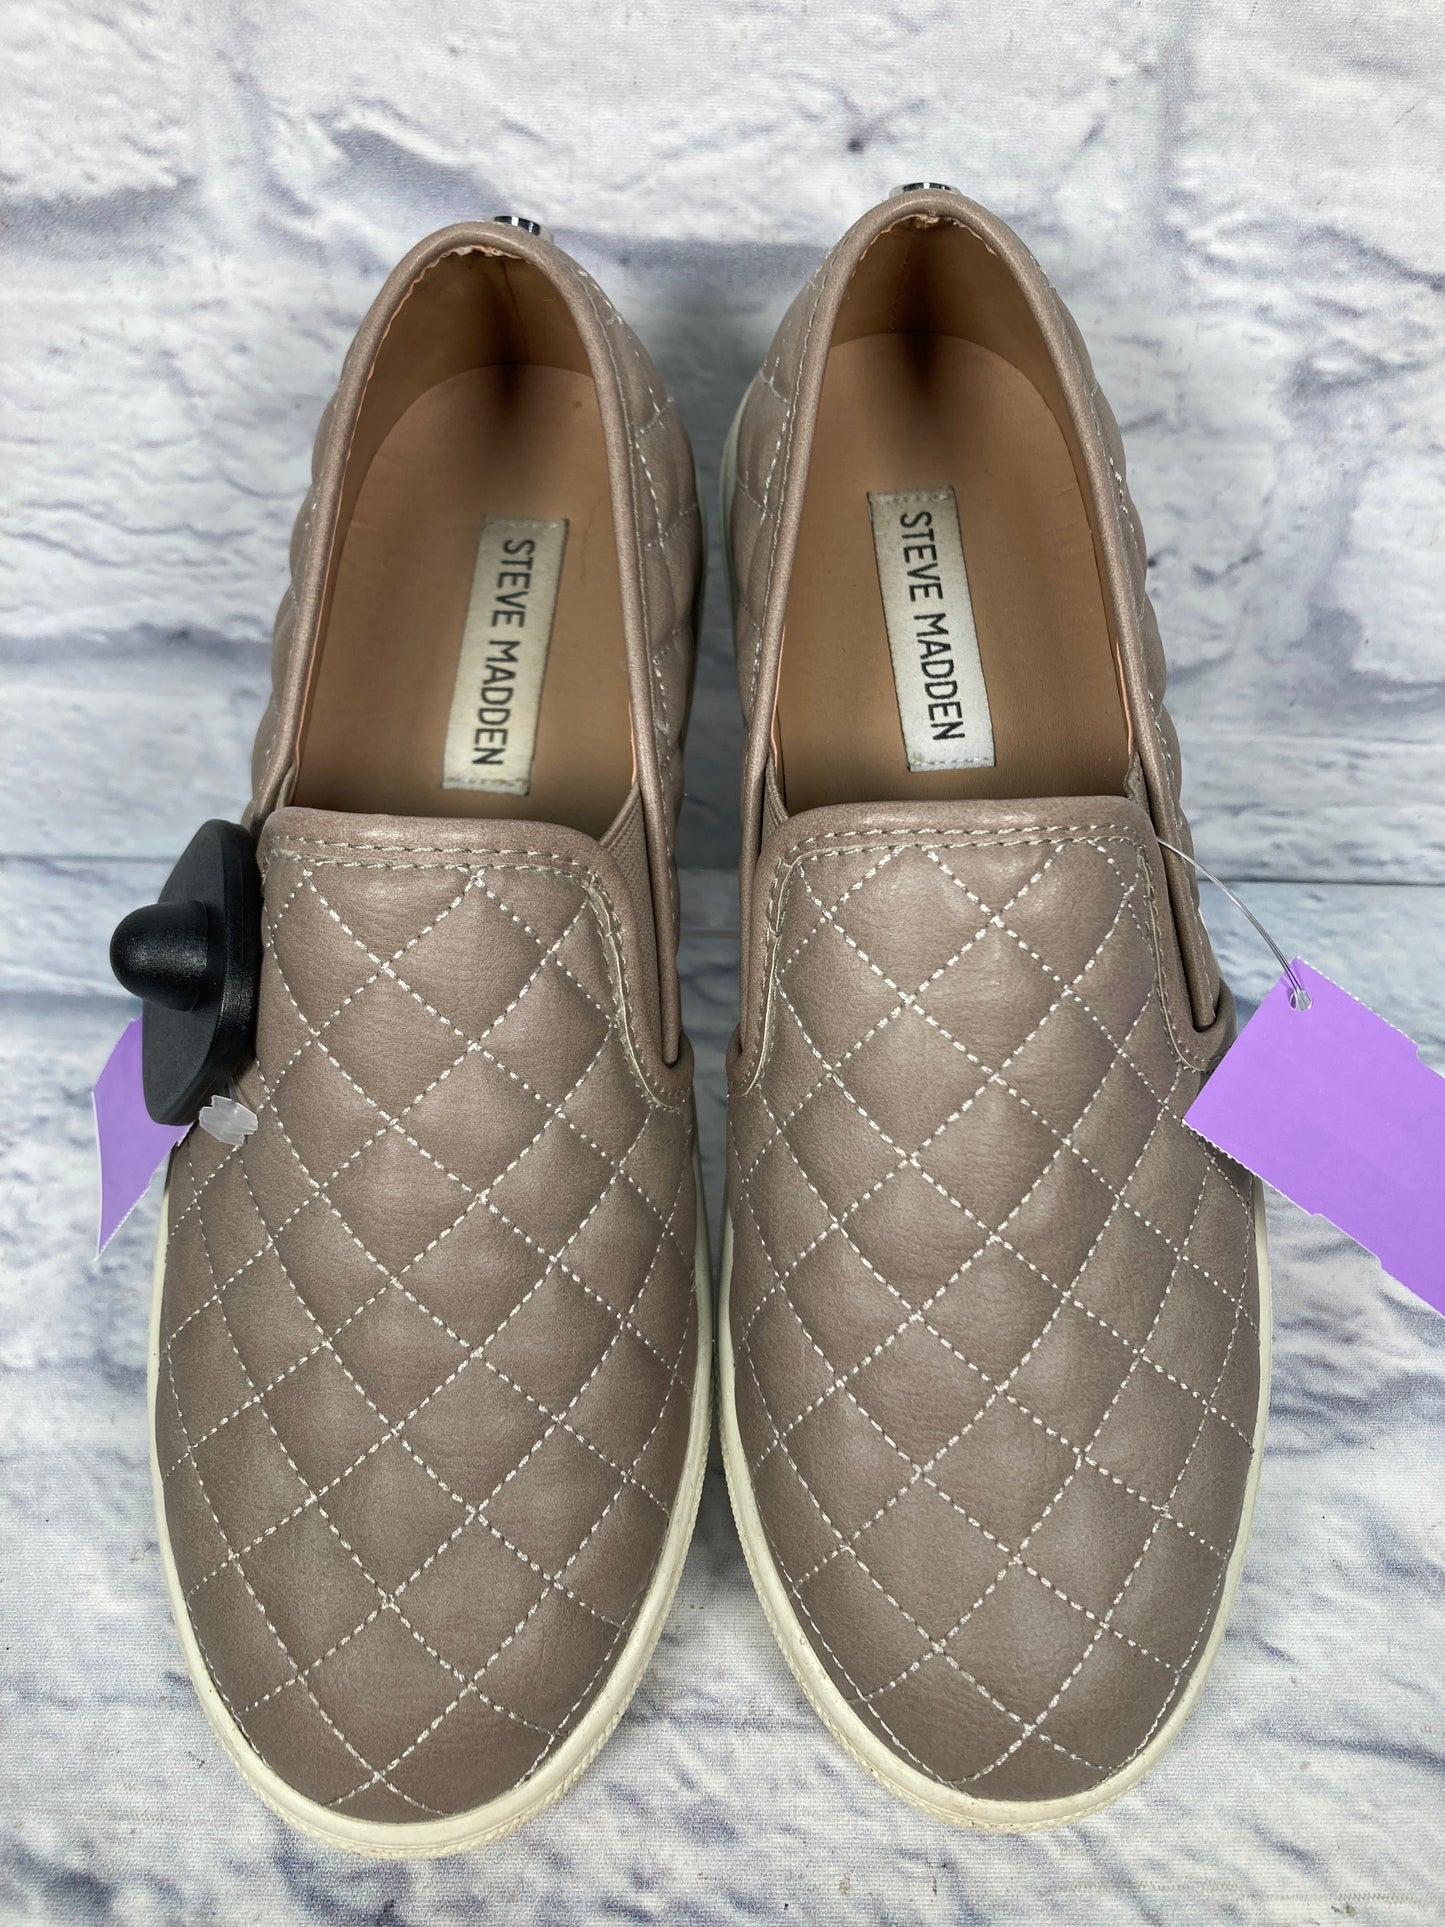 Taupe Shoes Sneakers Steve Madden, Size 8